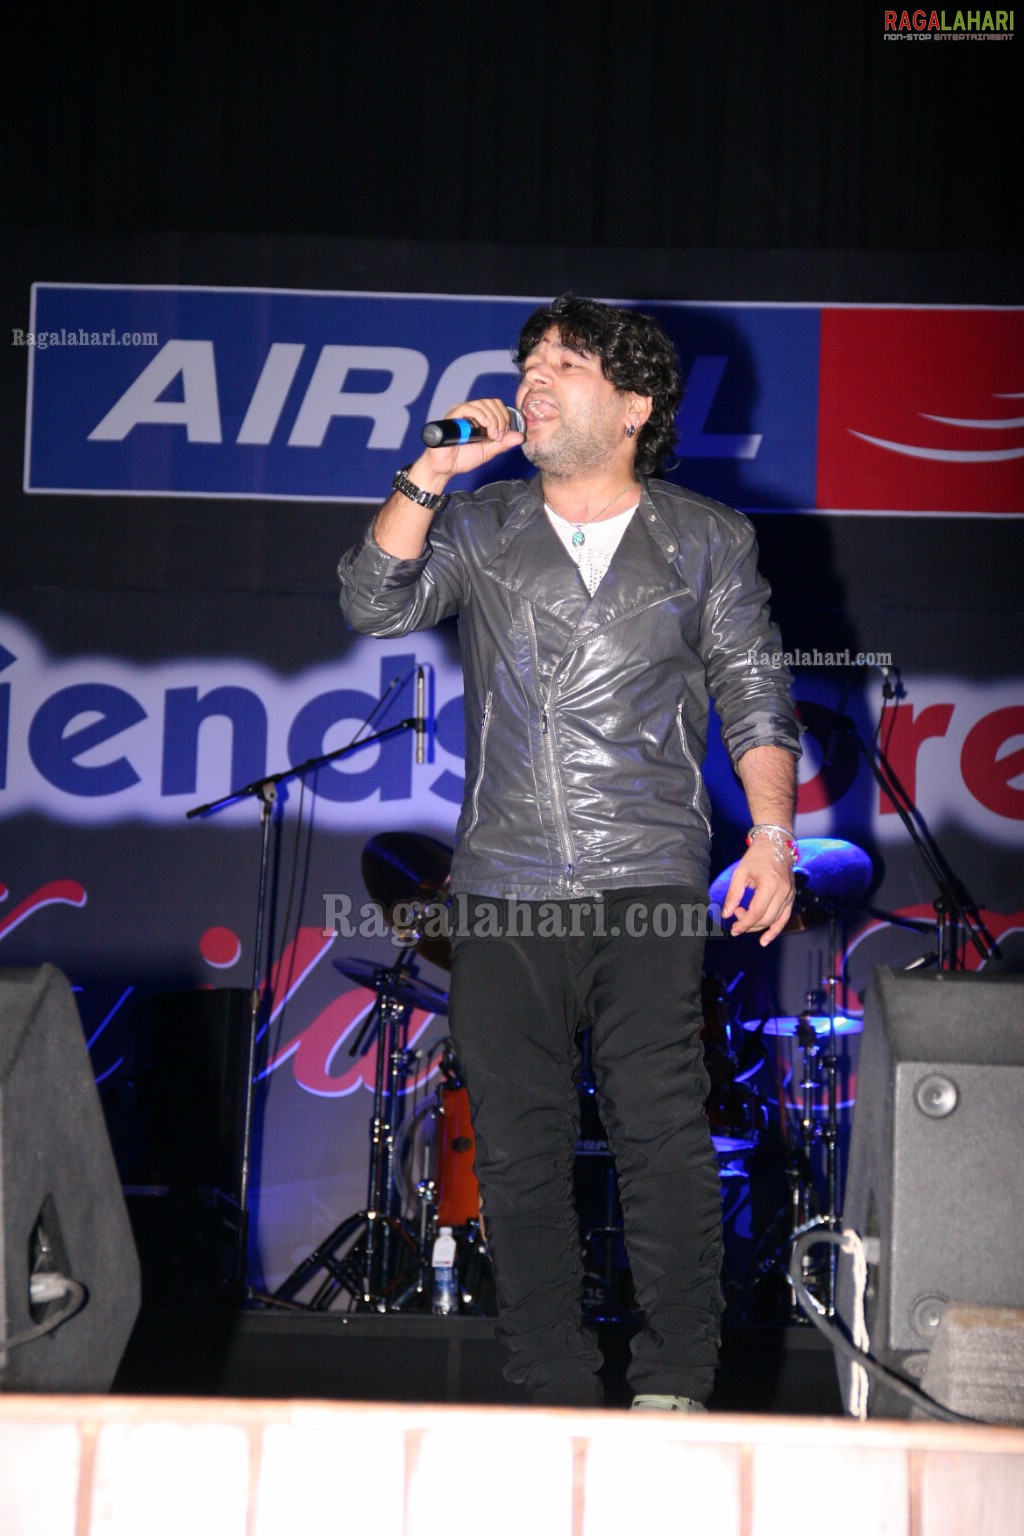 Kailash Kher's Performance at Hyderabad